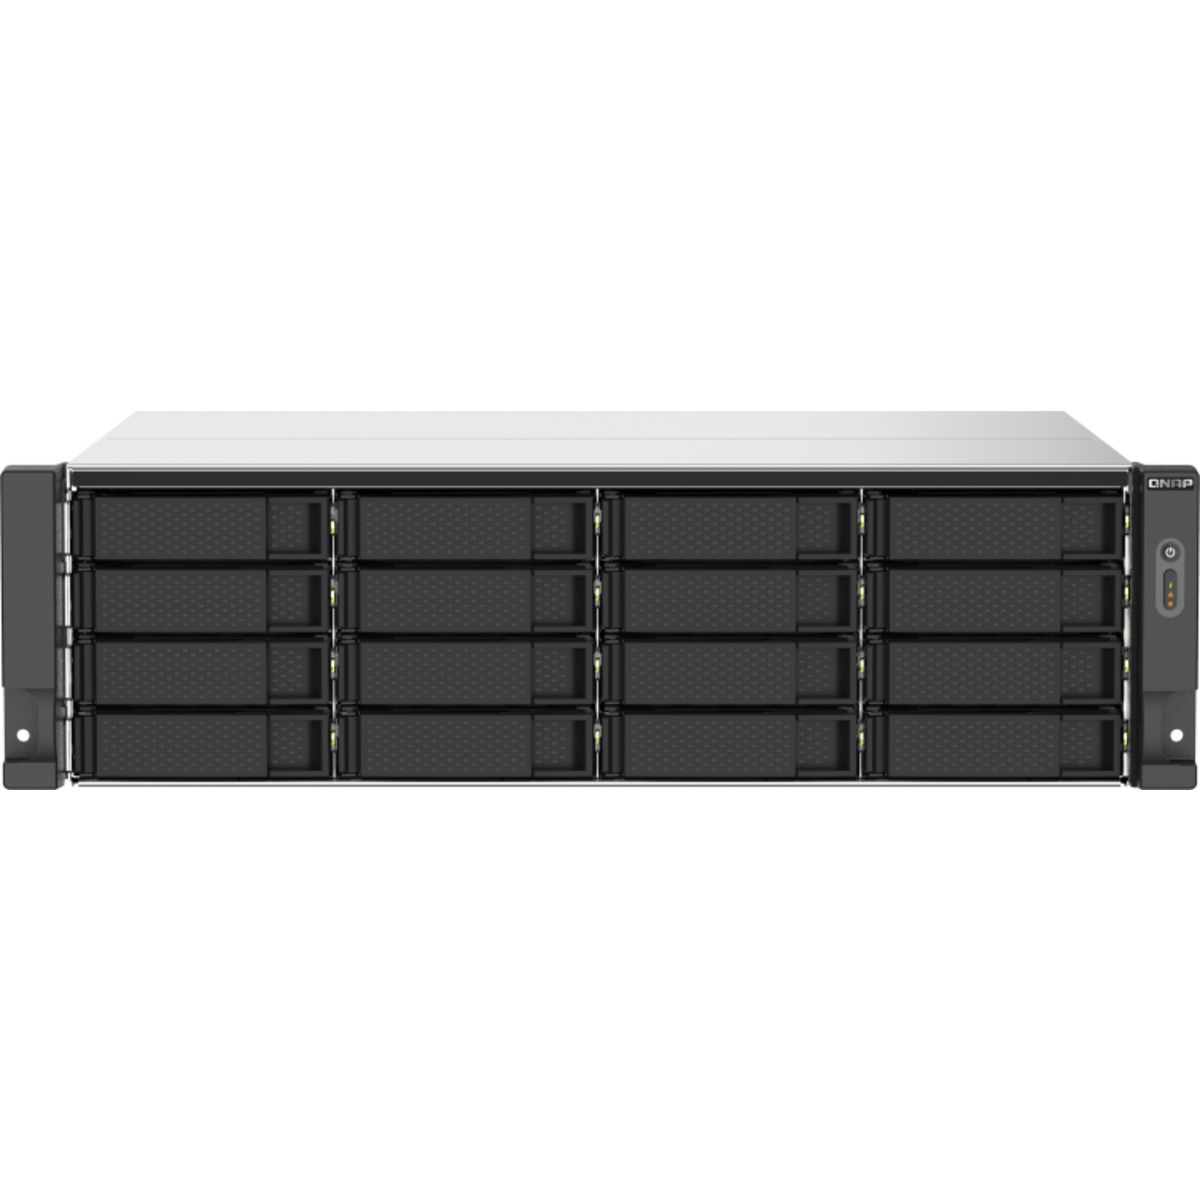 QNAP TS-1673AU-RP 288tb 16-Bay RackMount Multimedia / Power User / Business NAS - Network Attached Storage Device 16x18tb Western Digital Gold WD181KRYZ 3.5 7200rpm SATA 6Gb/s HDD ENTERPRISE Class Drives Installed - Burn-In Tested - FREE RAM UPGRADE TS-1673AU-RP